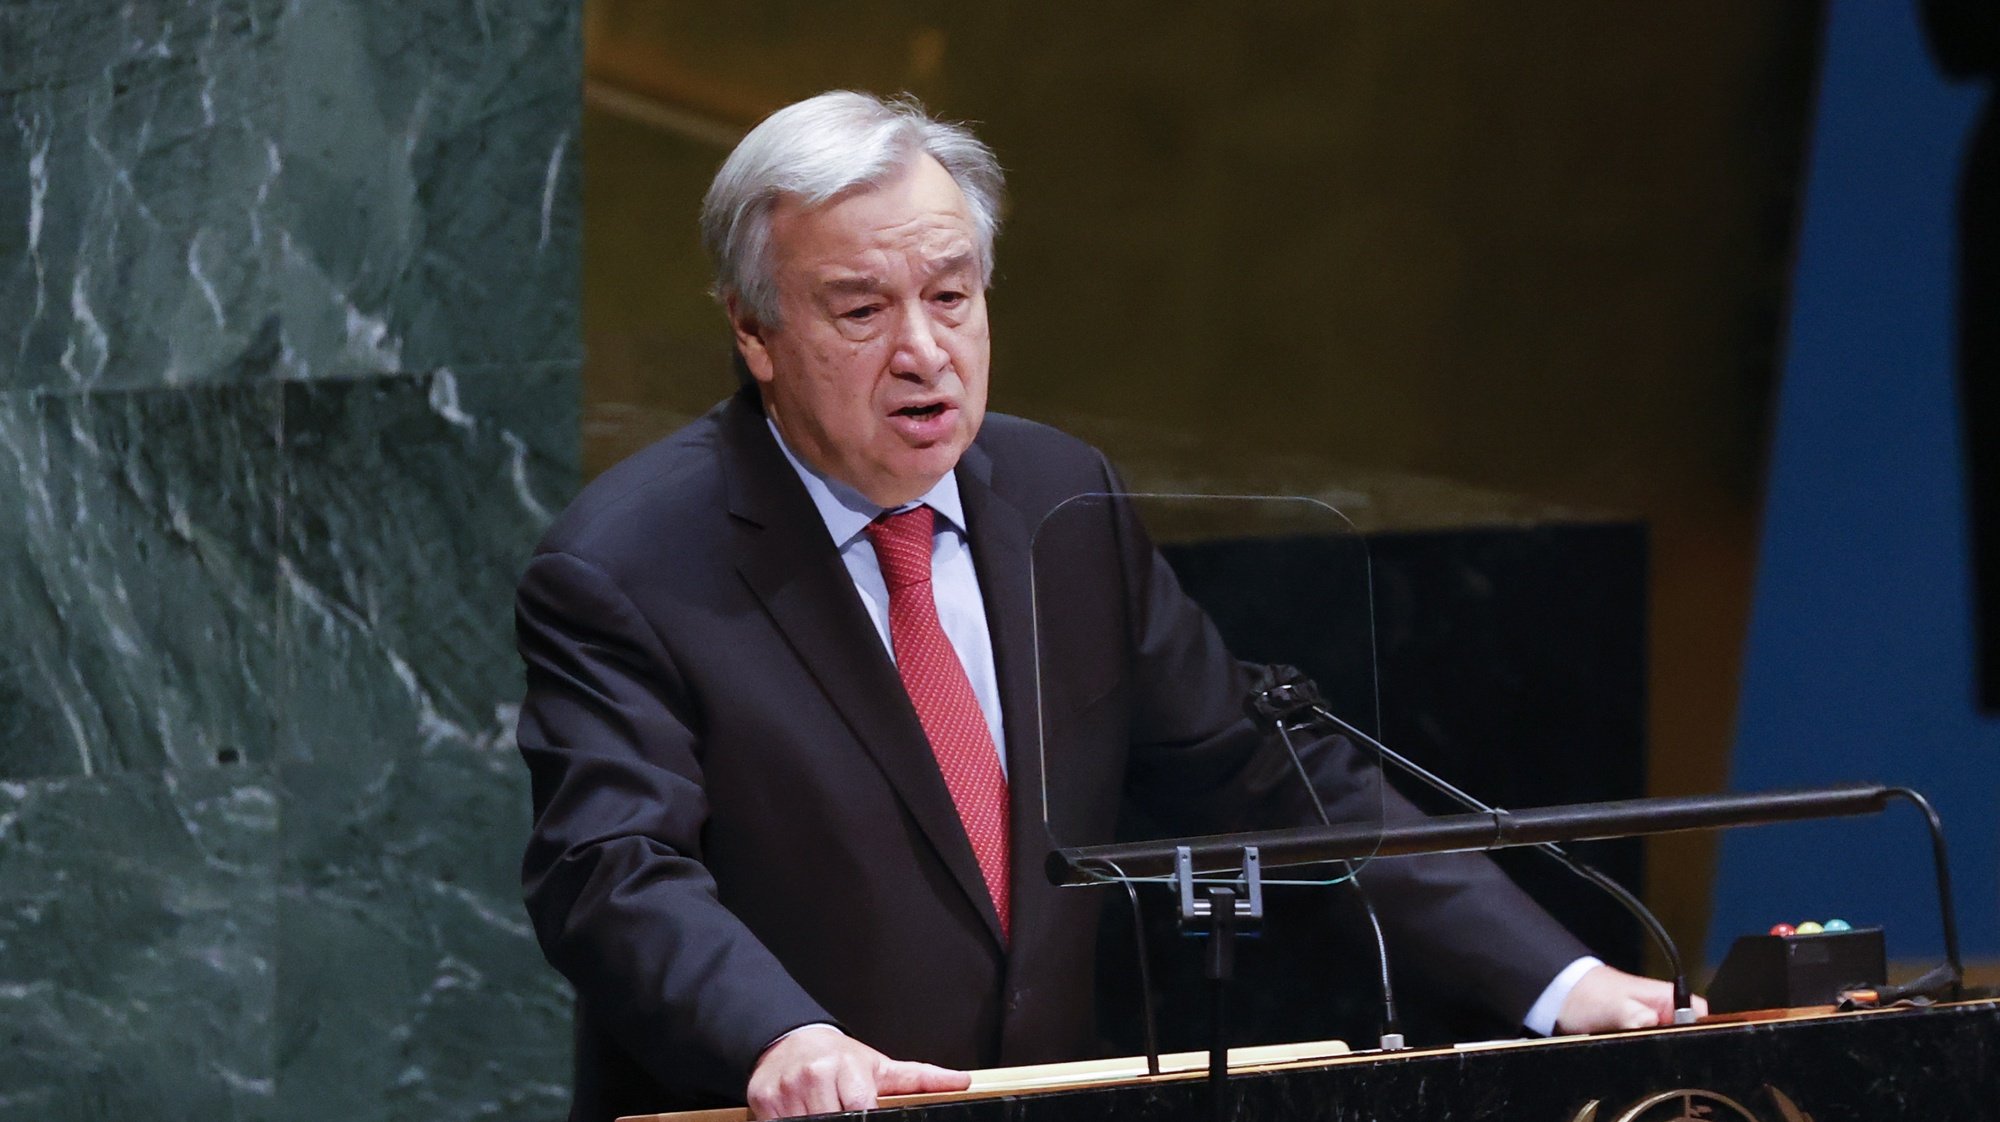 epa09215253 United Nations Secretary General Antonio Guterres addresses the United Nations General Assembly on the situation in the Middle East, including the Palestinian question, at United Nations Headquarters in New York, New York, USA, 20 May 2021.  EPA/JASON SZENES